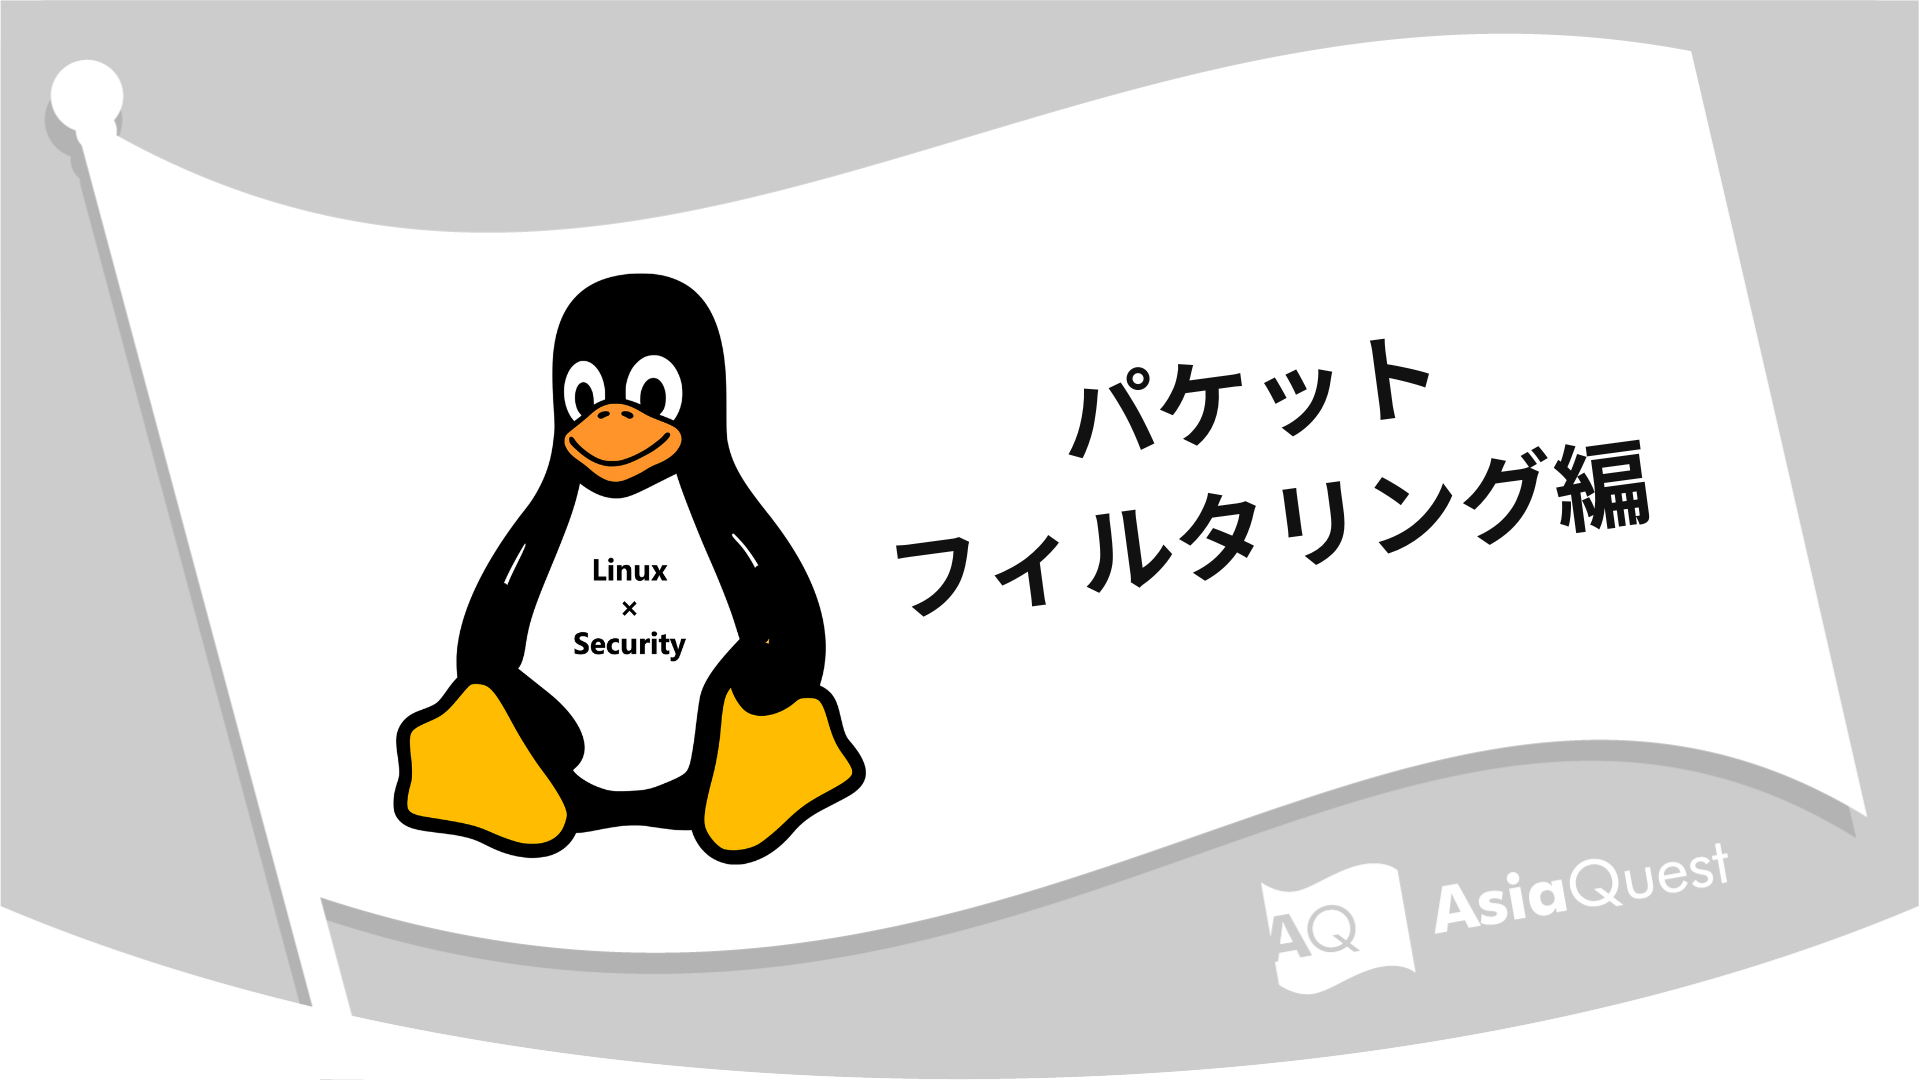 Linux × Security パケットフィルタリング編